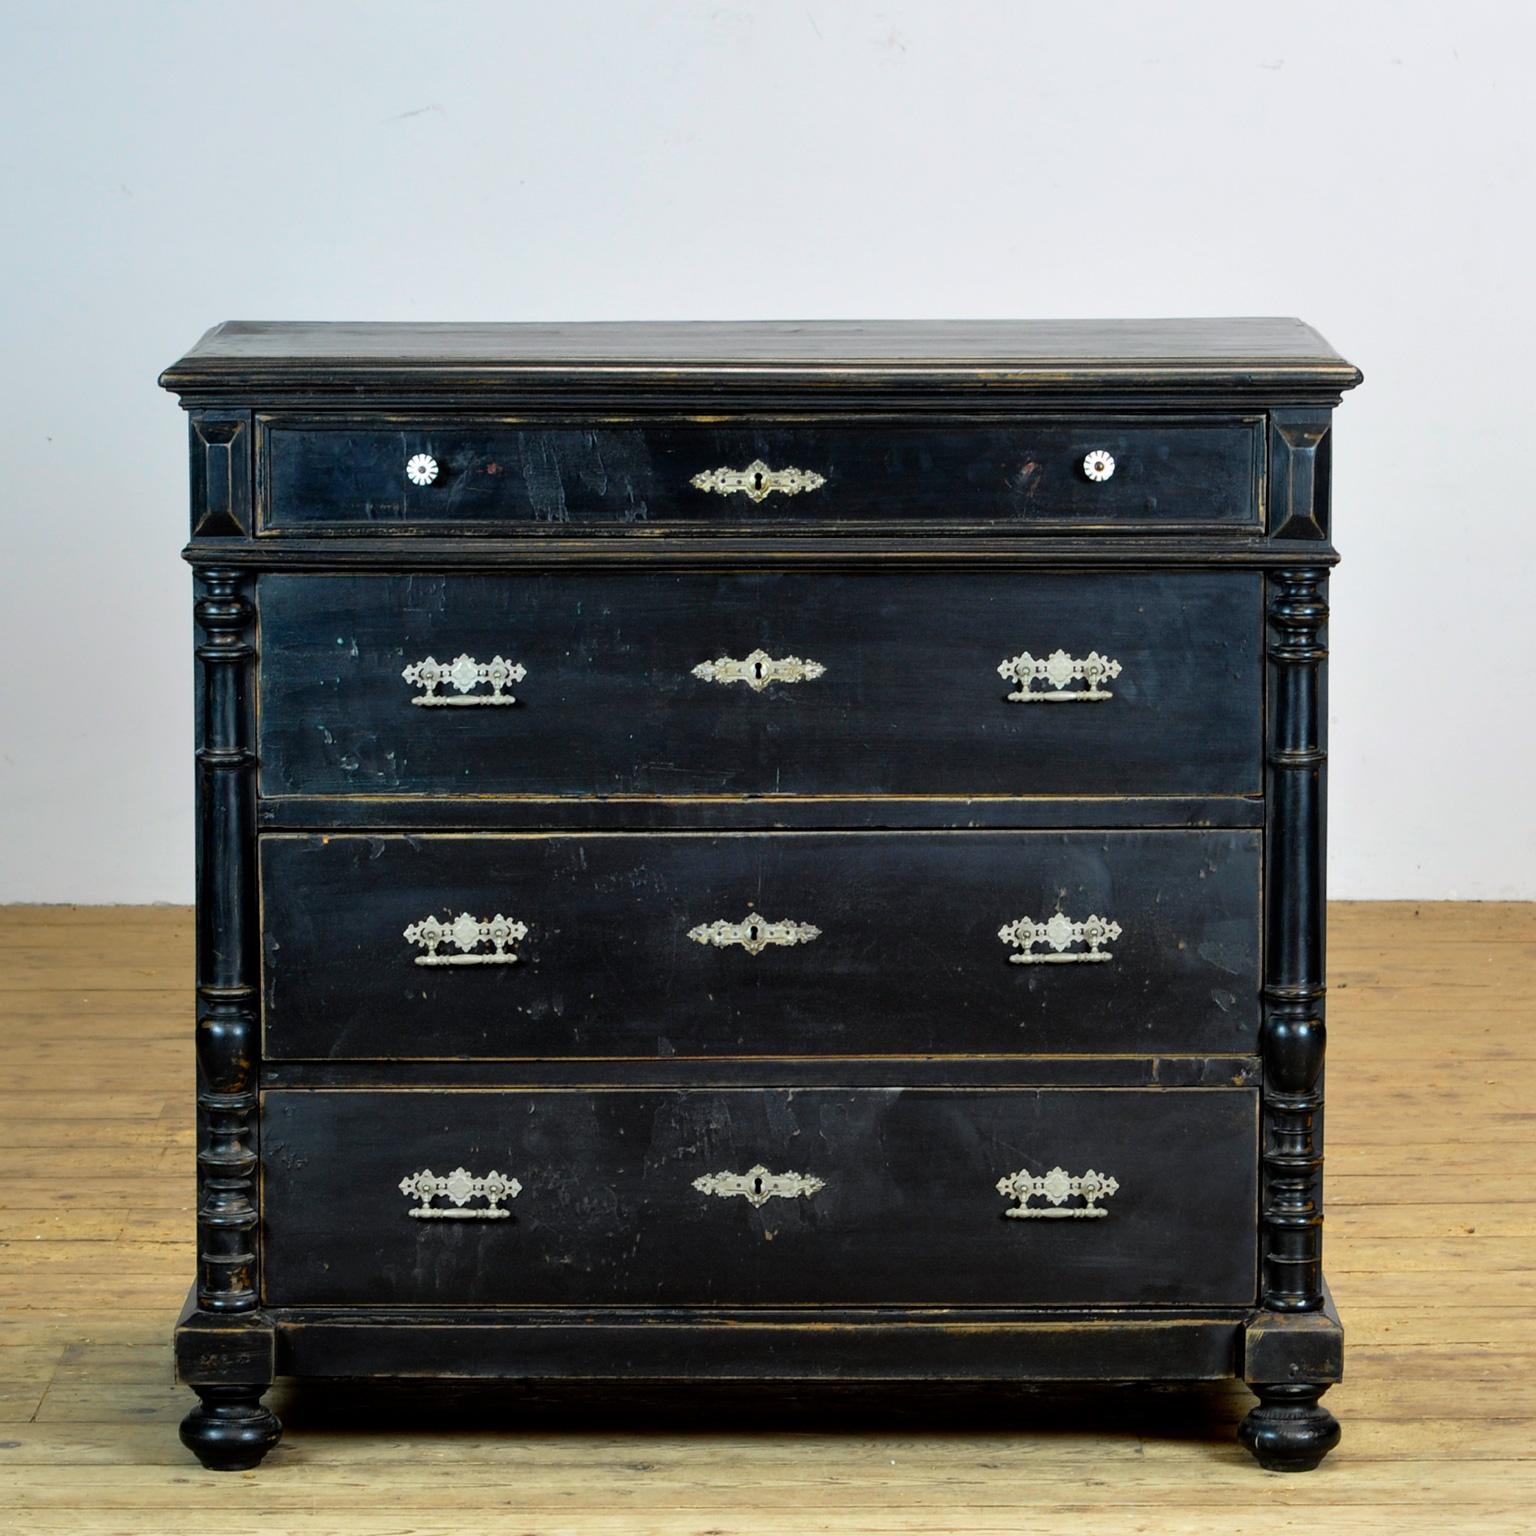 Chest of drawers made of pine, made in France circa 1920.
The cabinet has 4 drawers of which the top drawer is less high. All the drawers are made with dovetail joints. All fittings and knobs are original.